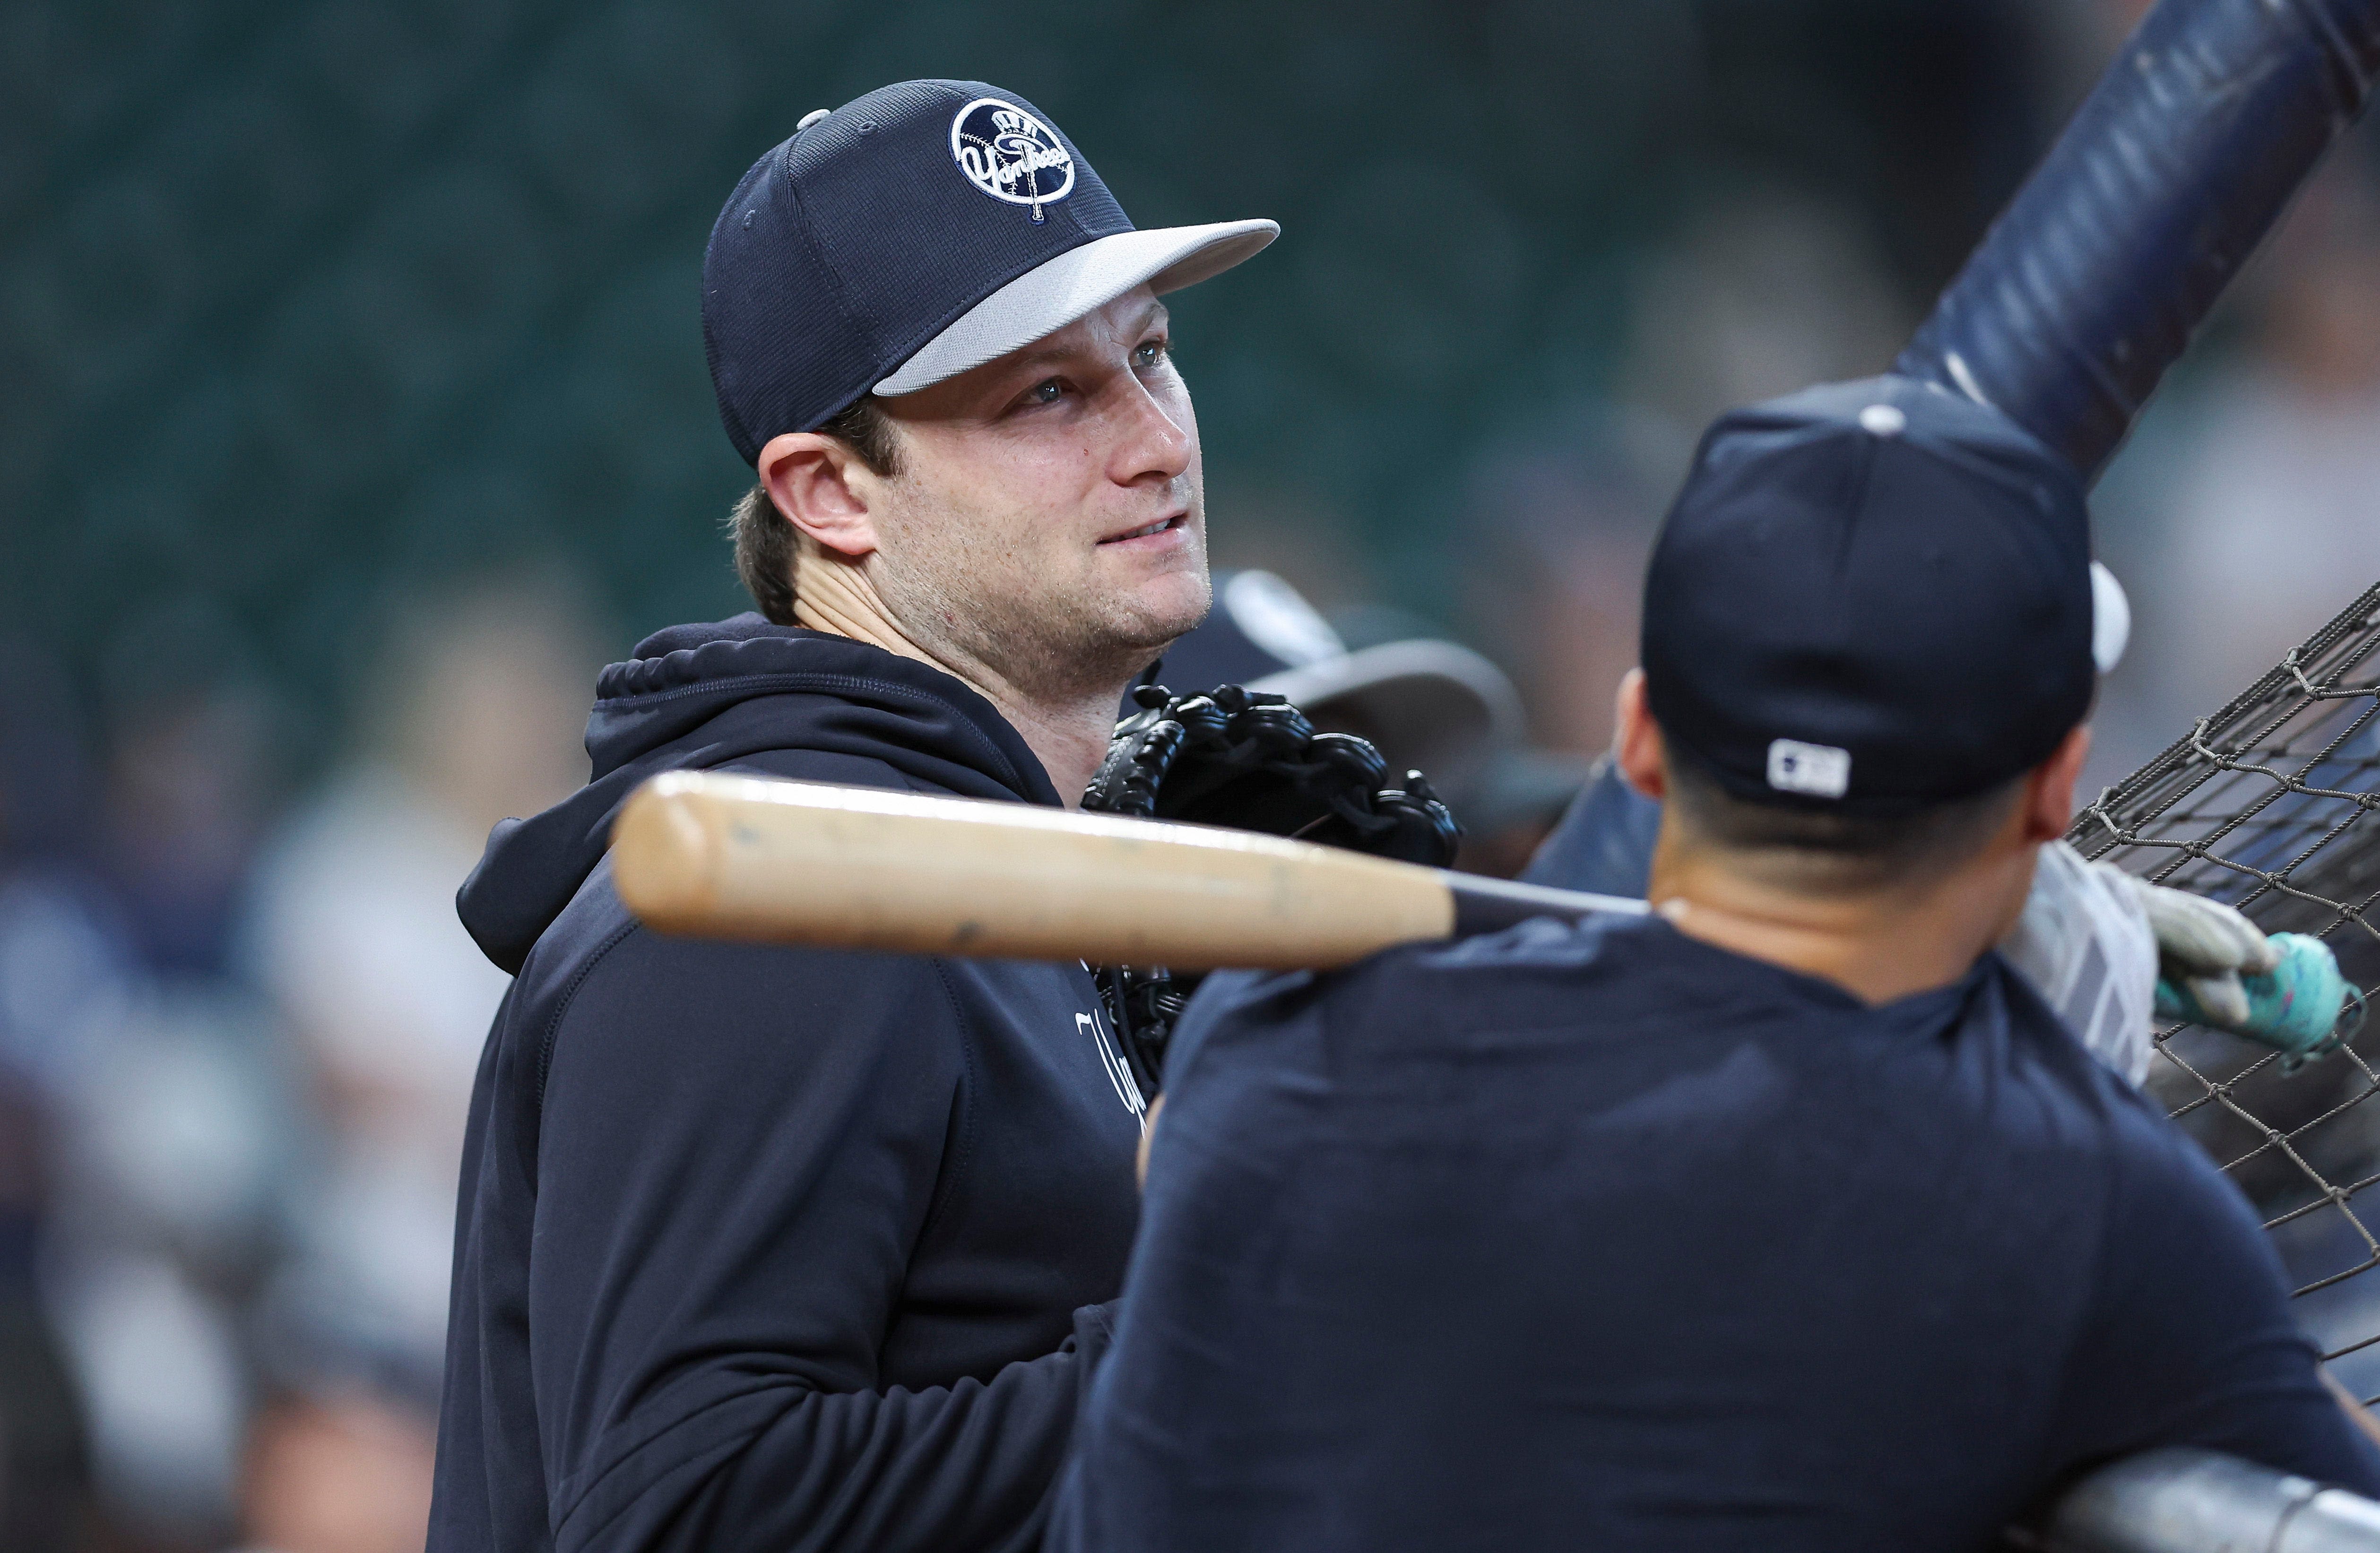 Yankees' ace Gerrit Cole takes another step forward in his pitching rehab